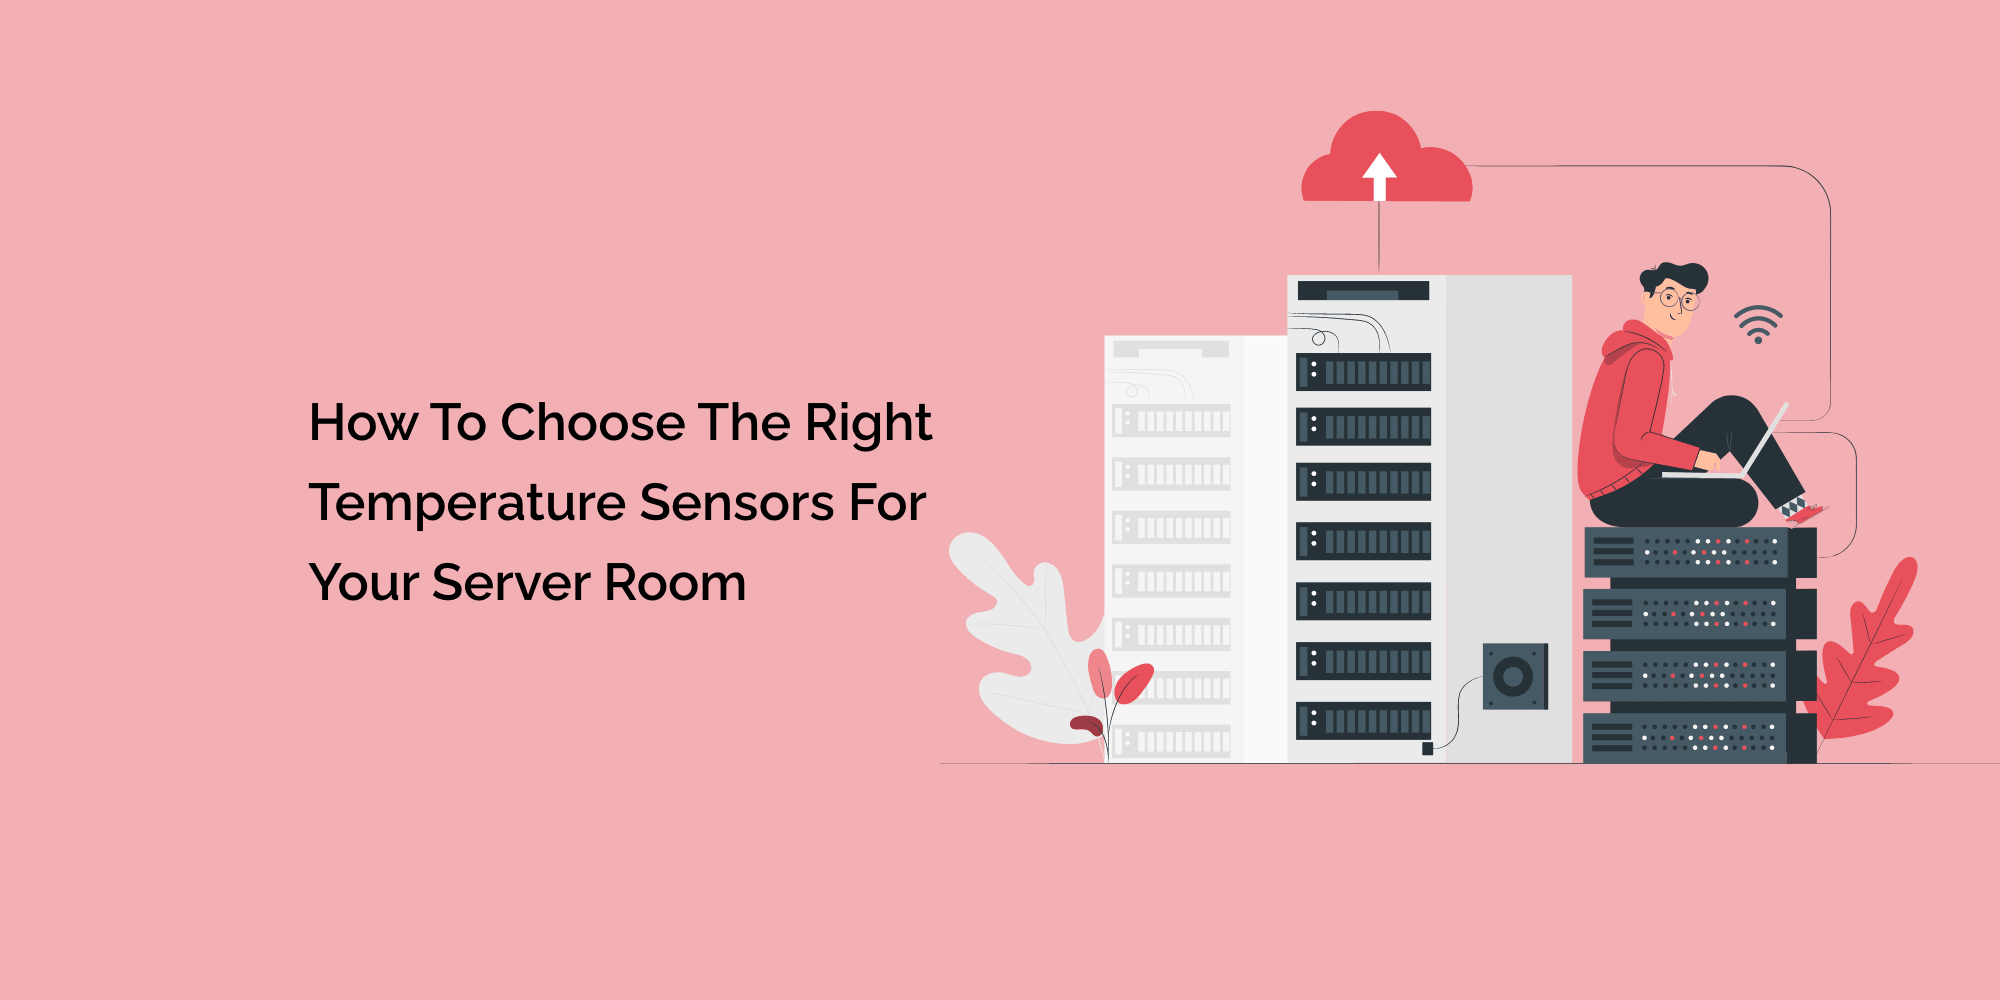 How to Choose the Right Temperature Sensors for Your Server Room